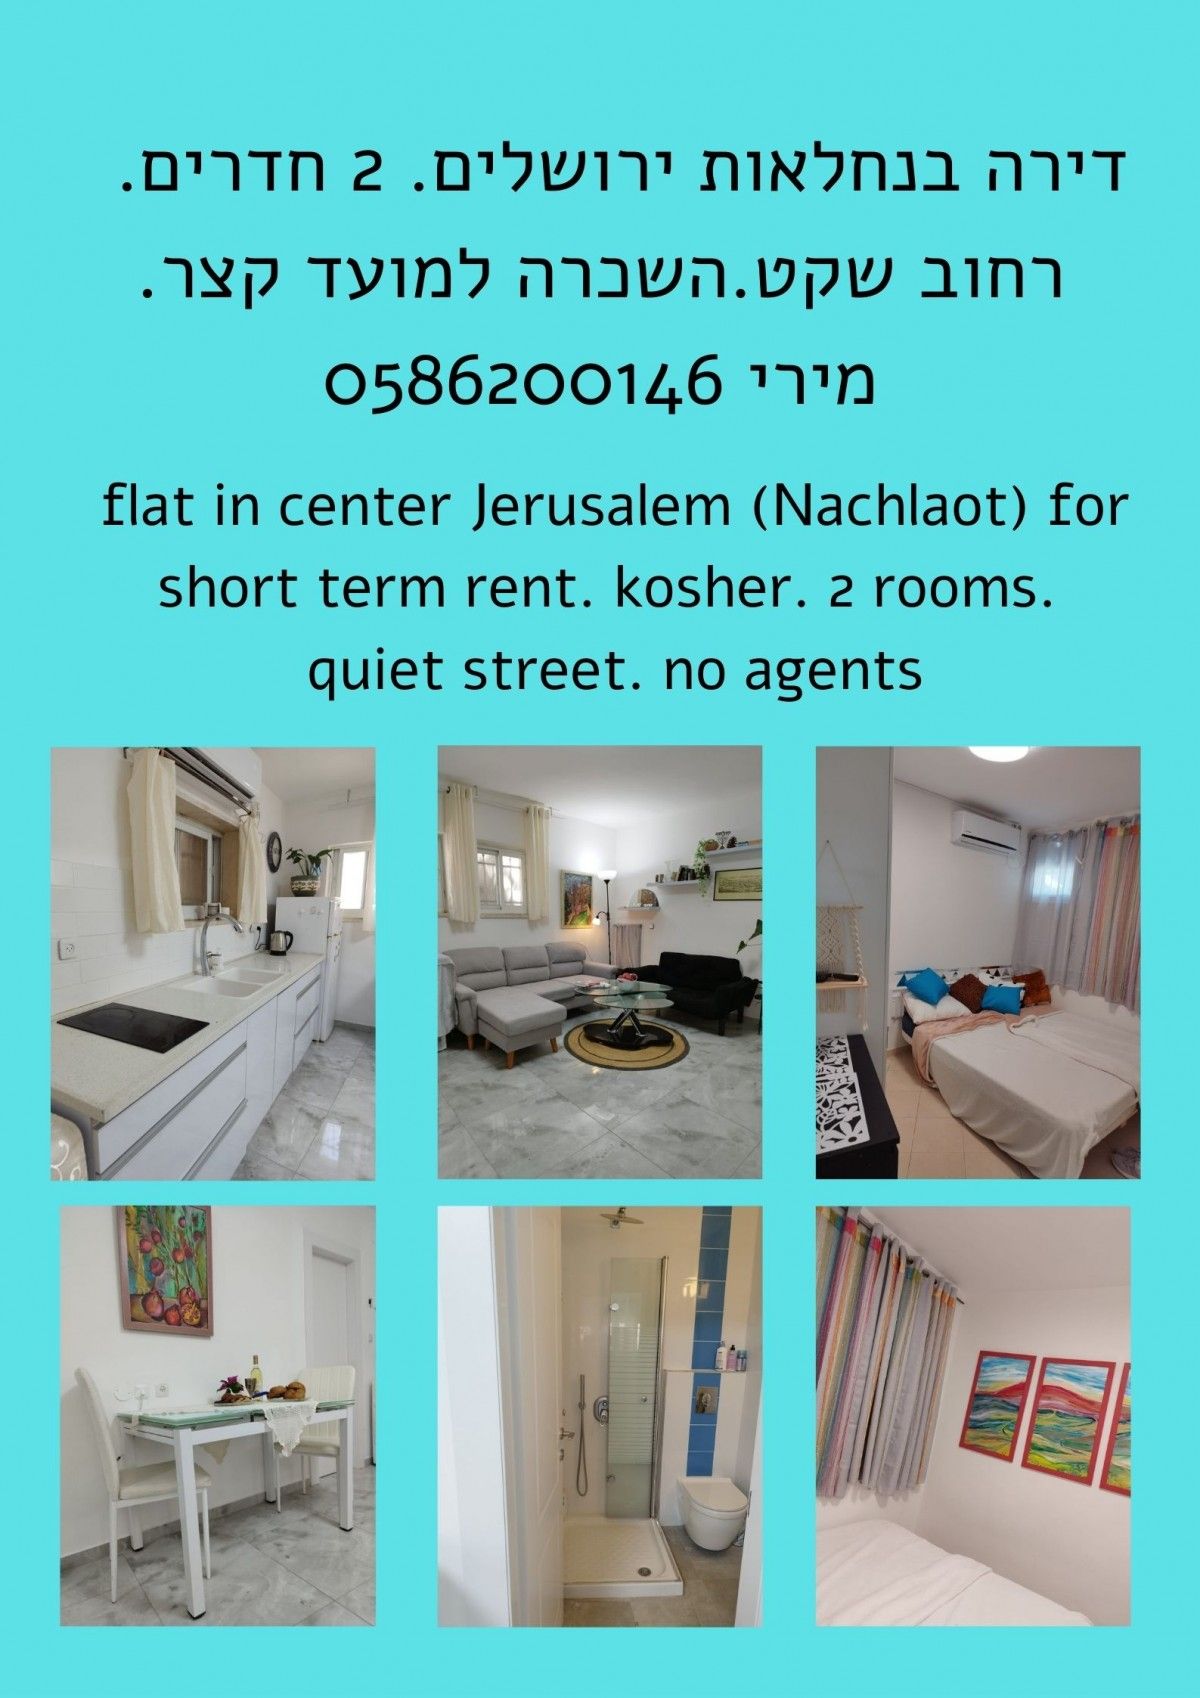 View 2 rooms in  center of Nachlaot